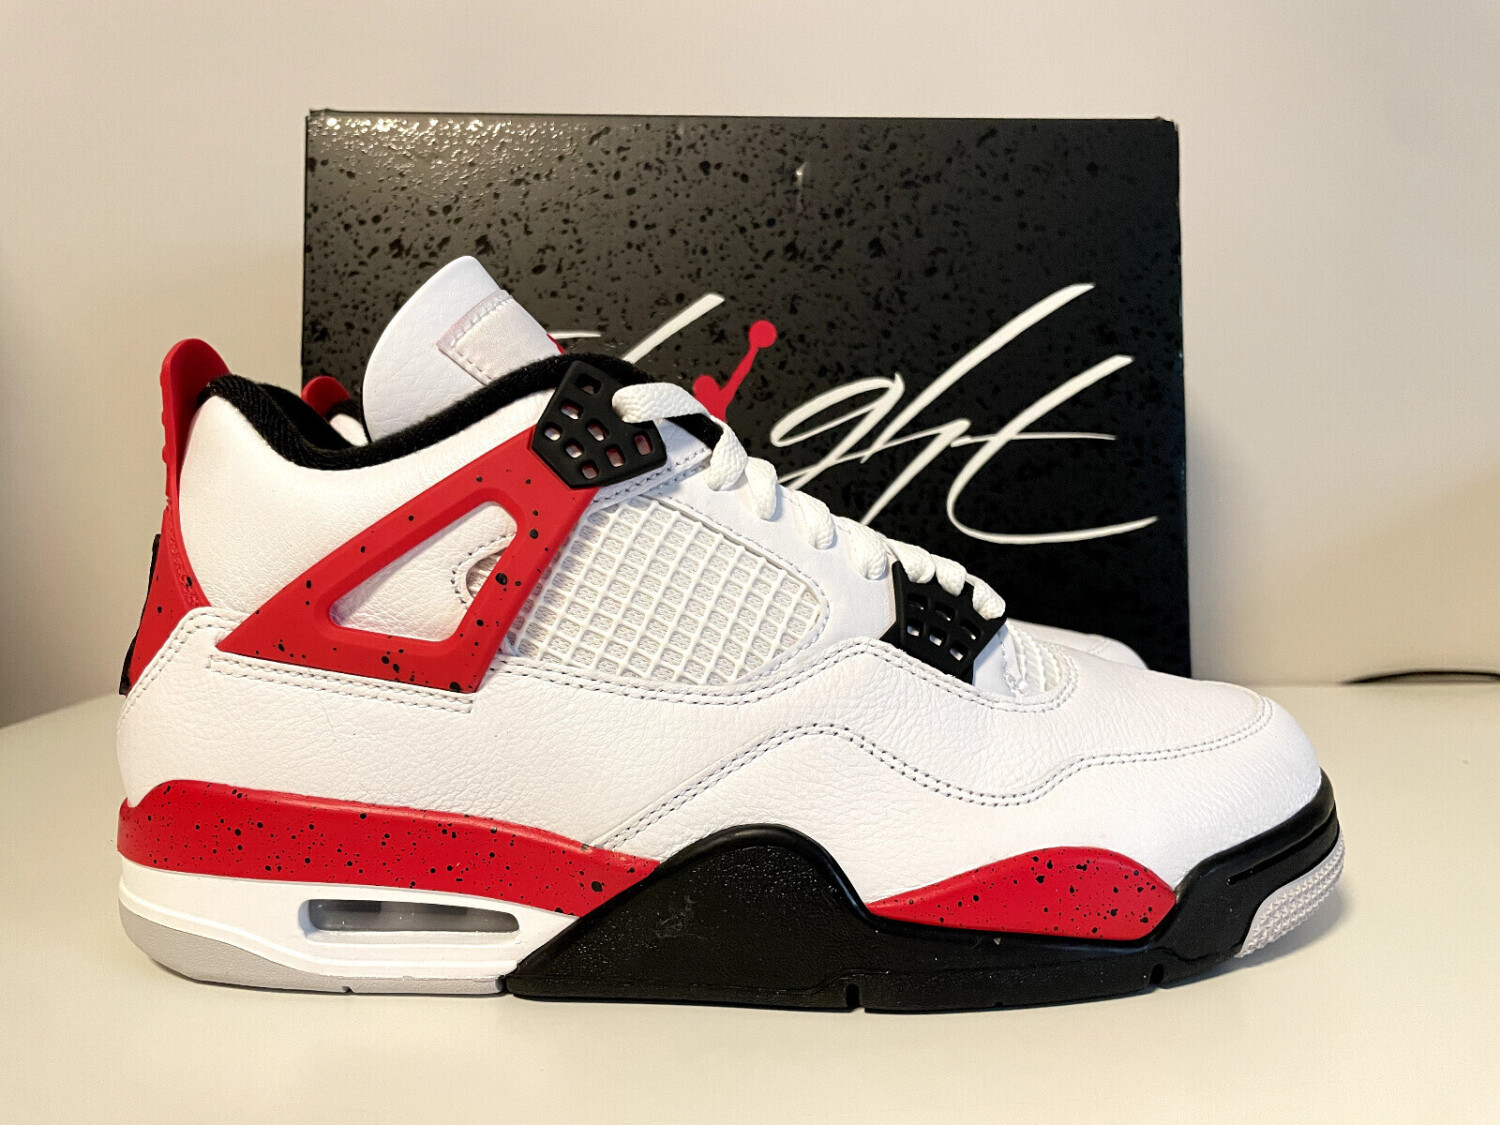 Buy Nike Air Jordan red cement from £53.00 (Today) – Best Deals on